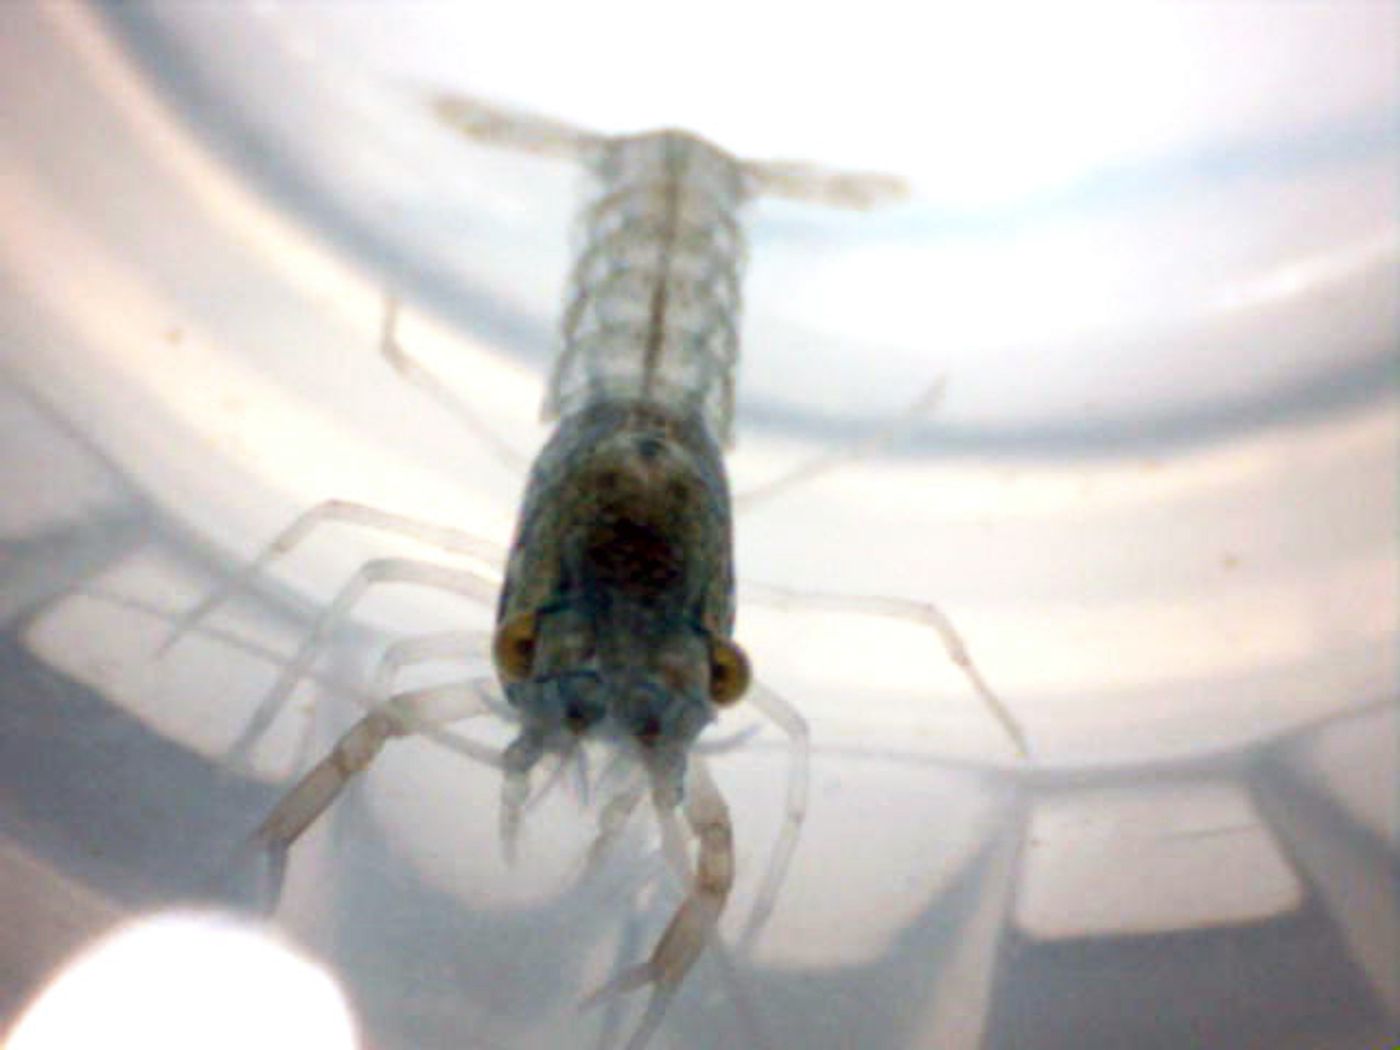 Marbled Crayfish fry about two days old. Image taken with a handheld microscope. / Credit: Wikimedia Commons/J-P Despault